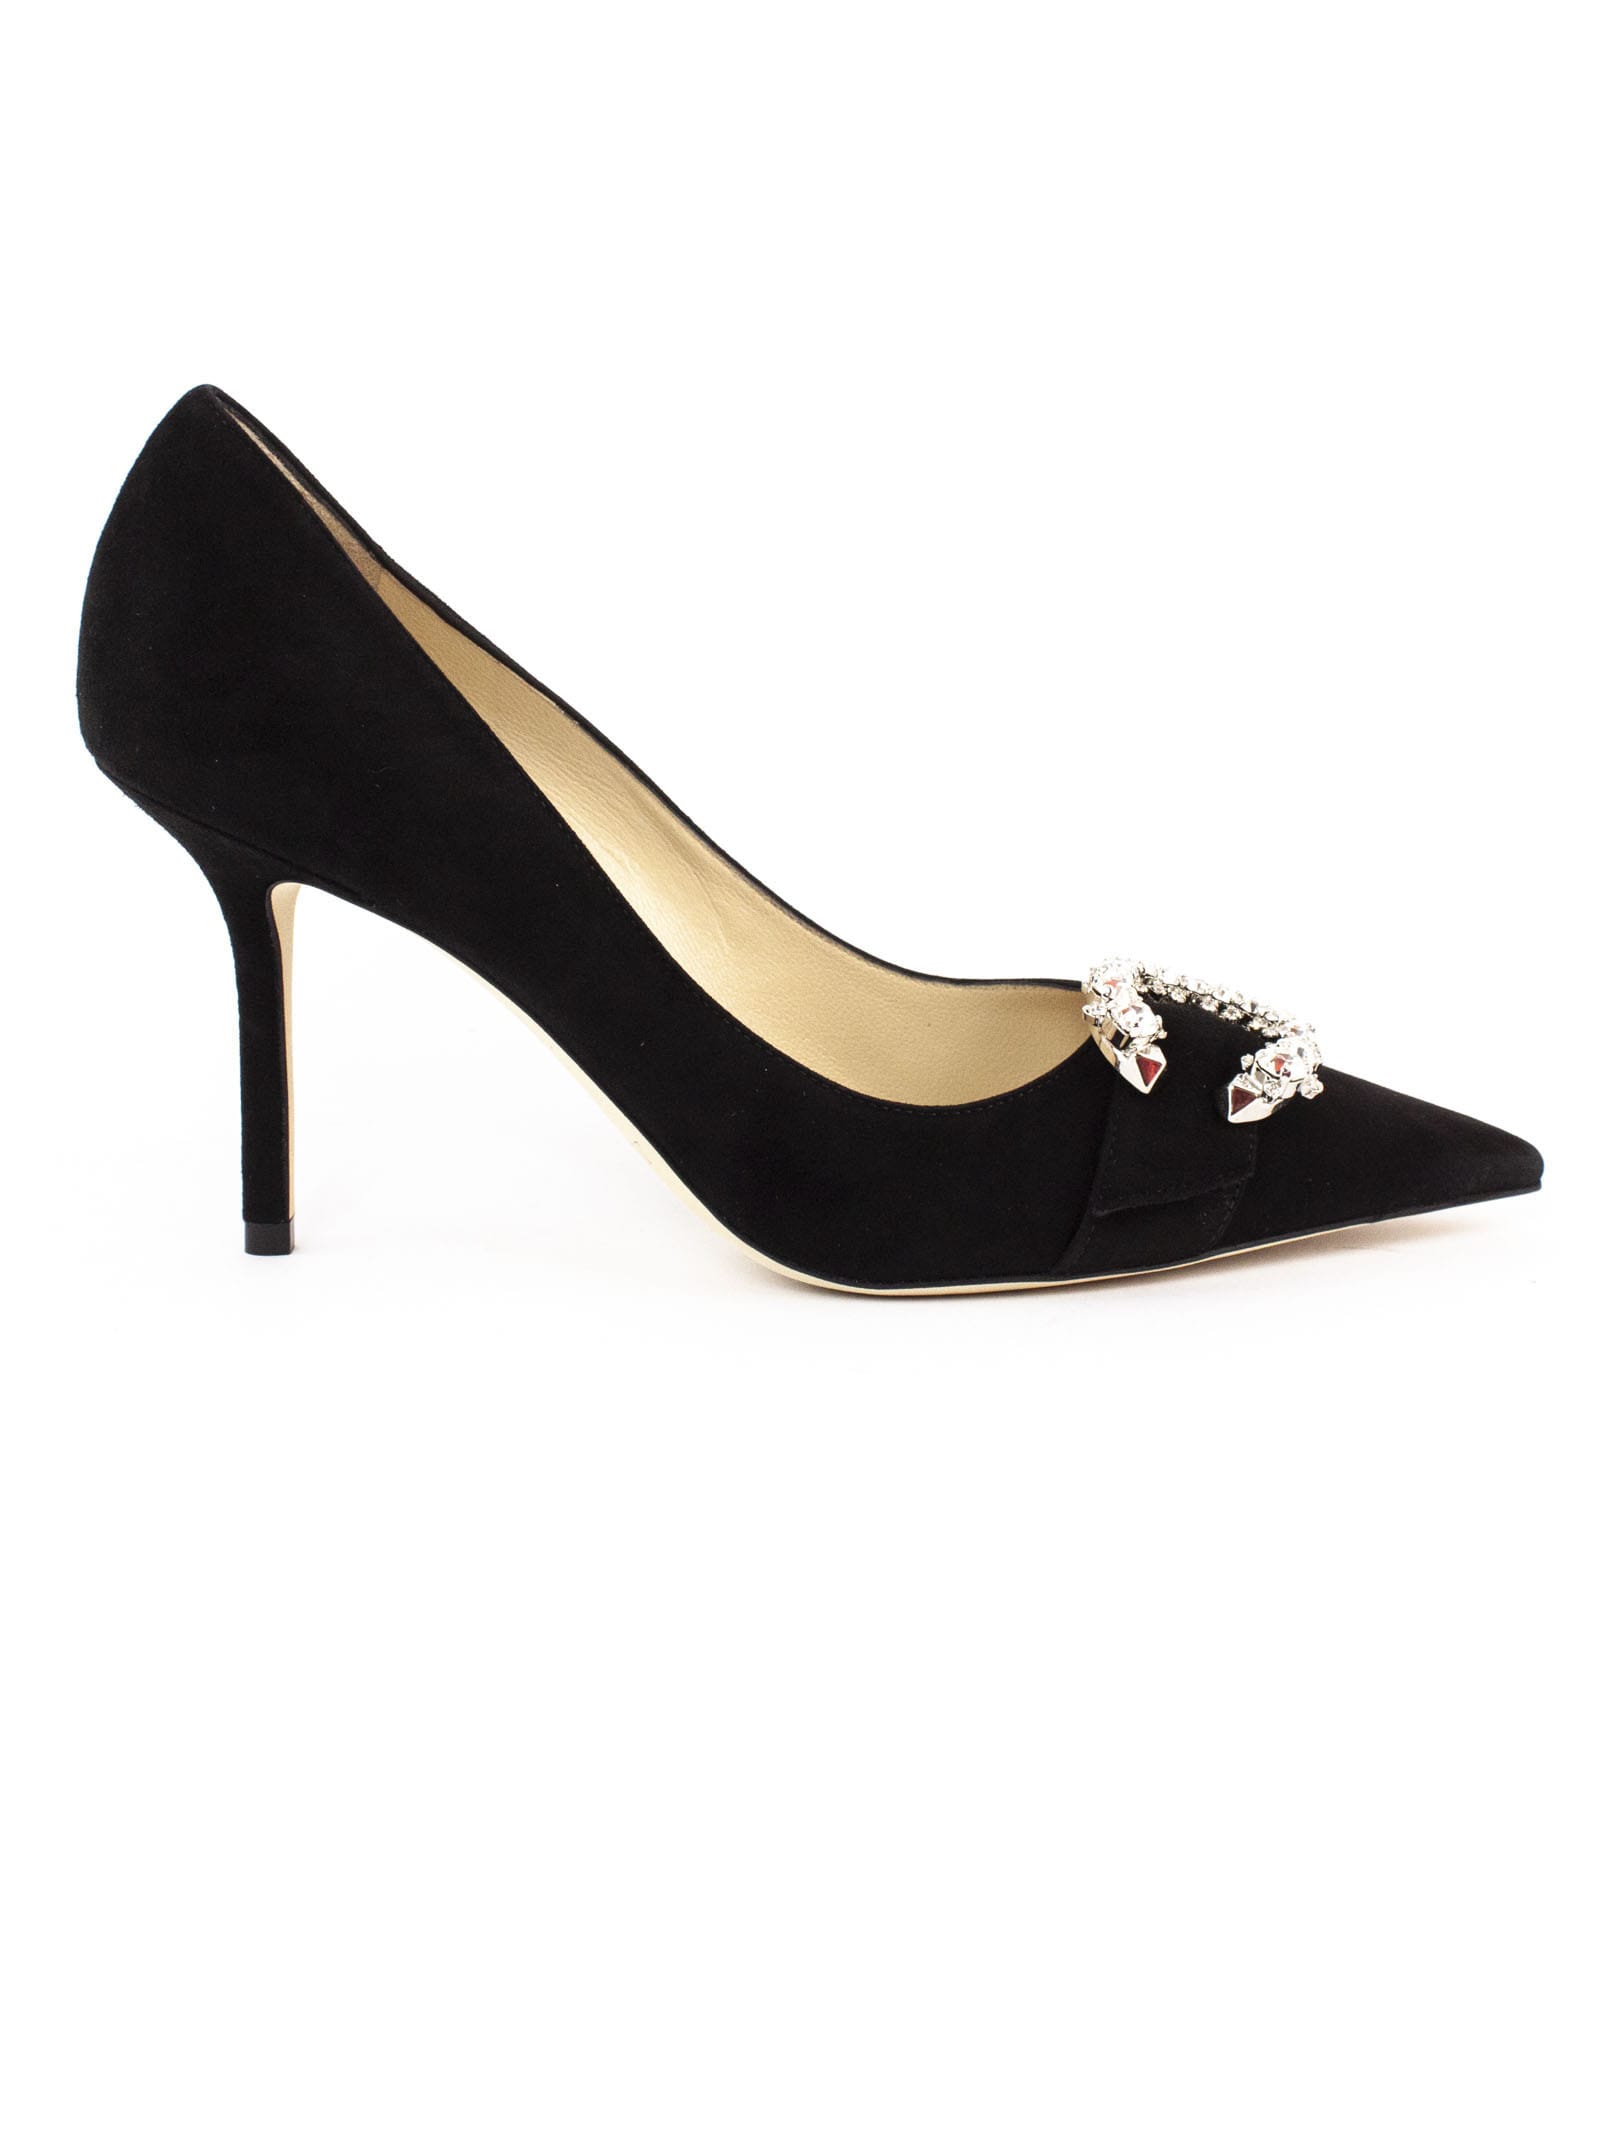 Buy Jimmy Choo Black Suede Pumps online, shop Jimmy Choo shoes with free shipping